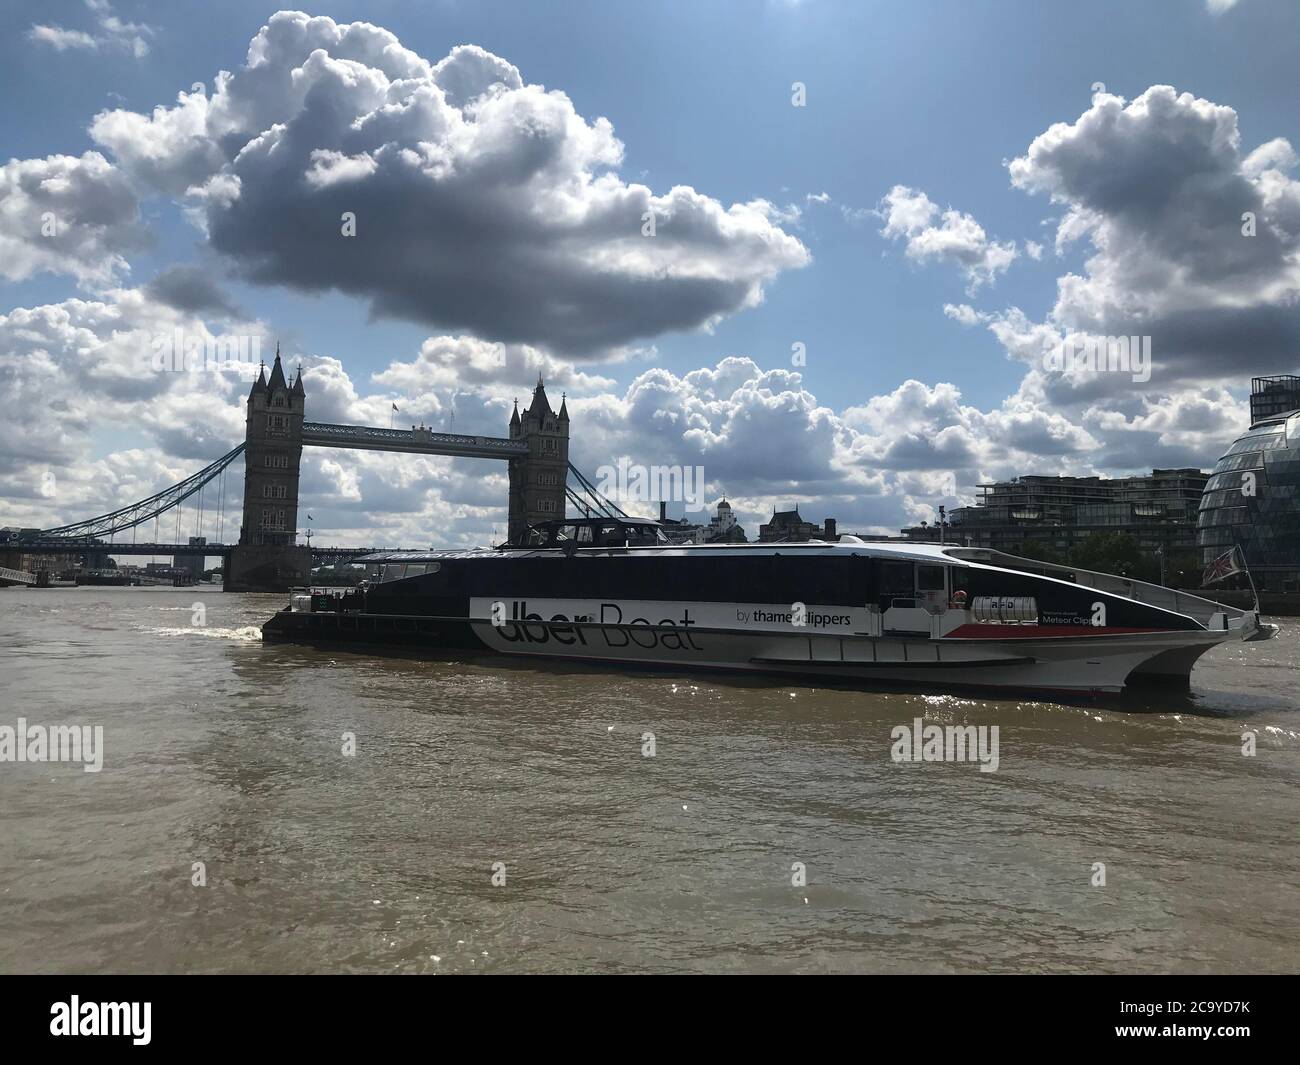 Monday 3rd August 2020, Uber boat by Thames clippers launches today in London United Kingdom, Londoners can now book Thames Clipper tickets straight through their Uber app Stock Photo